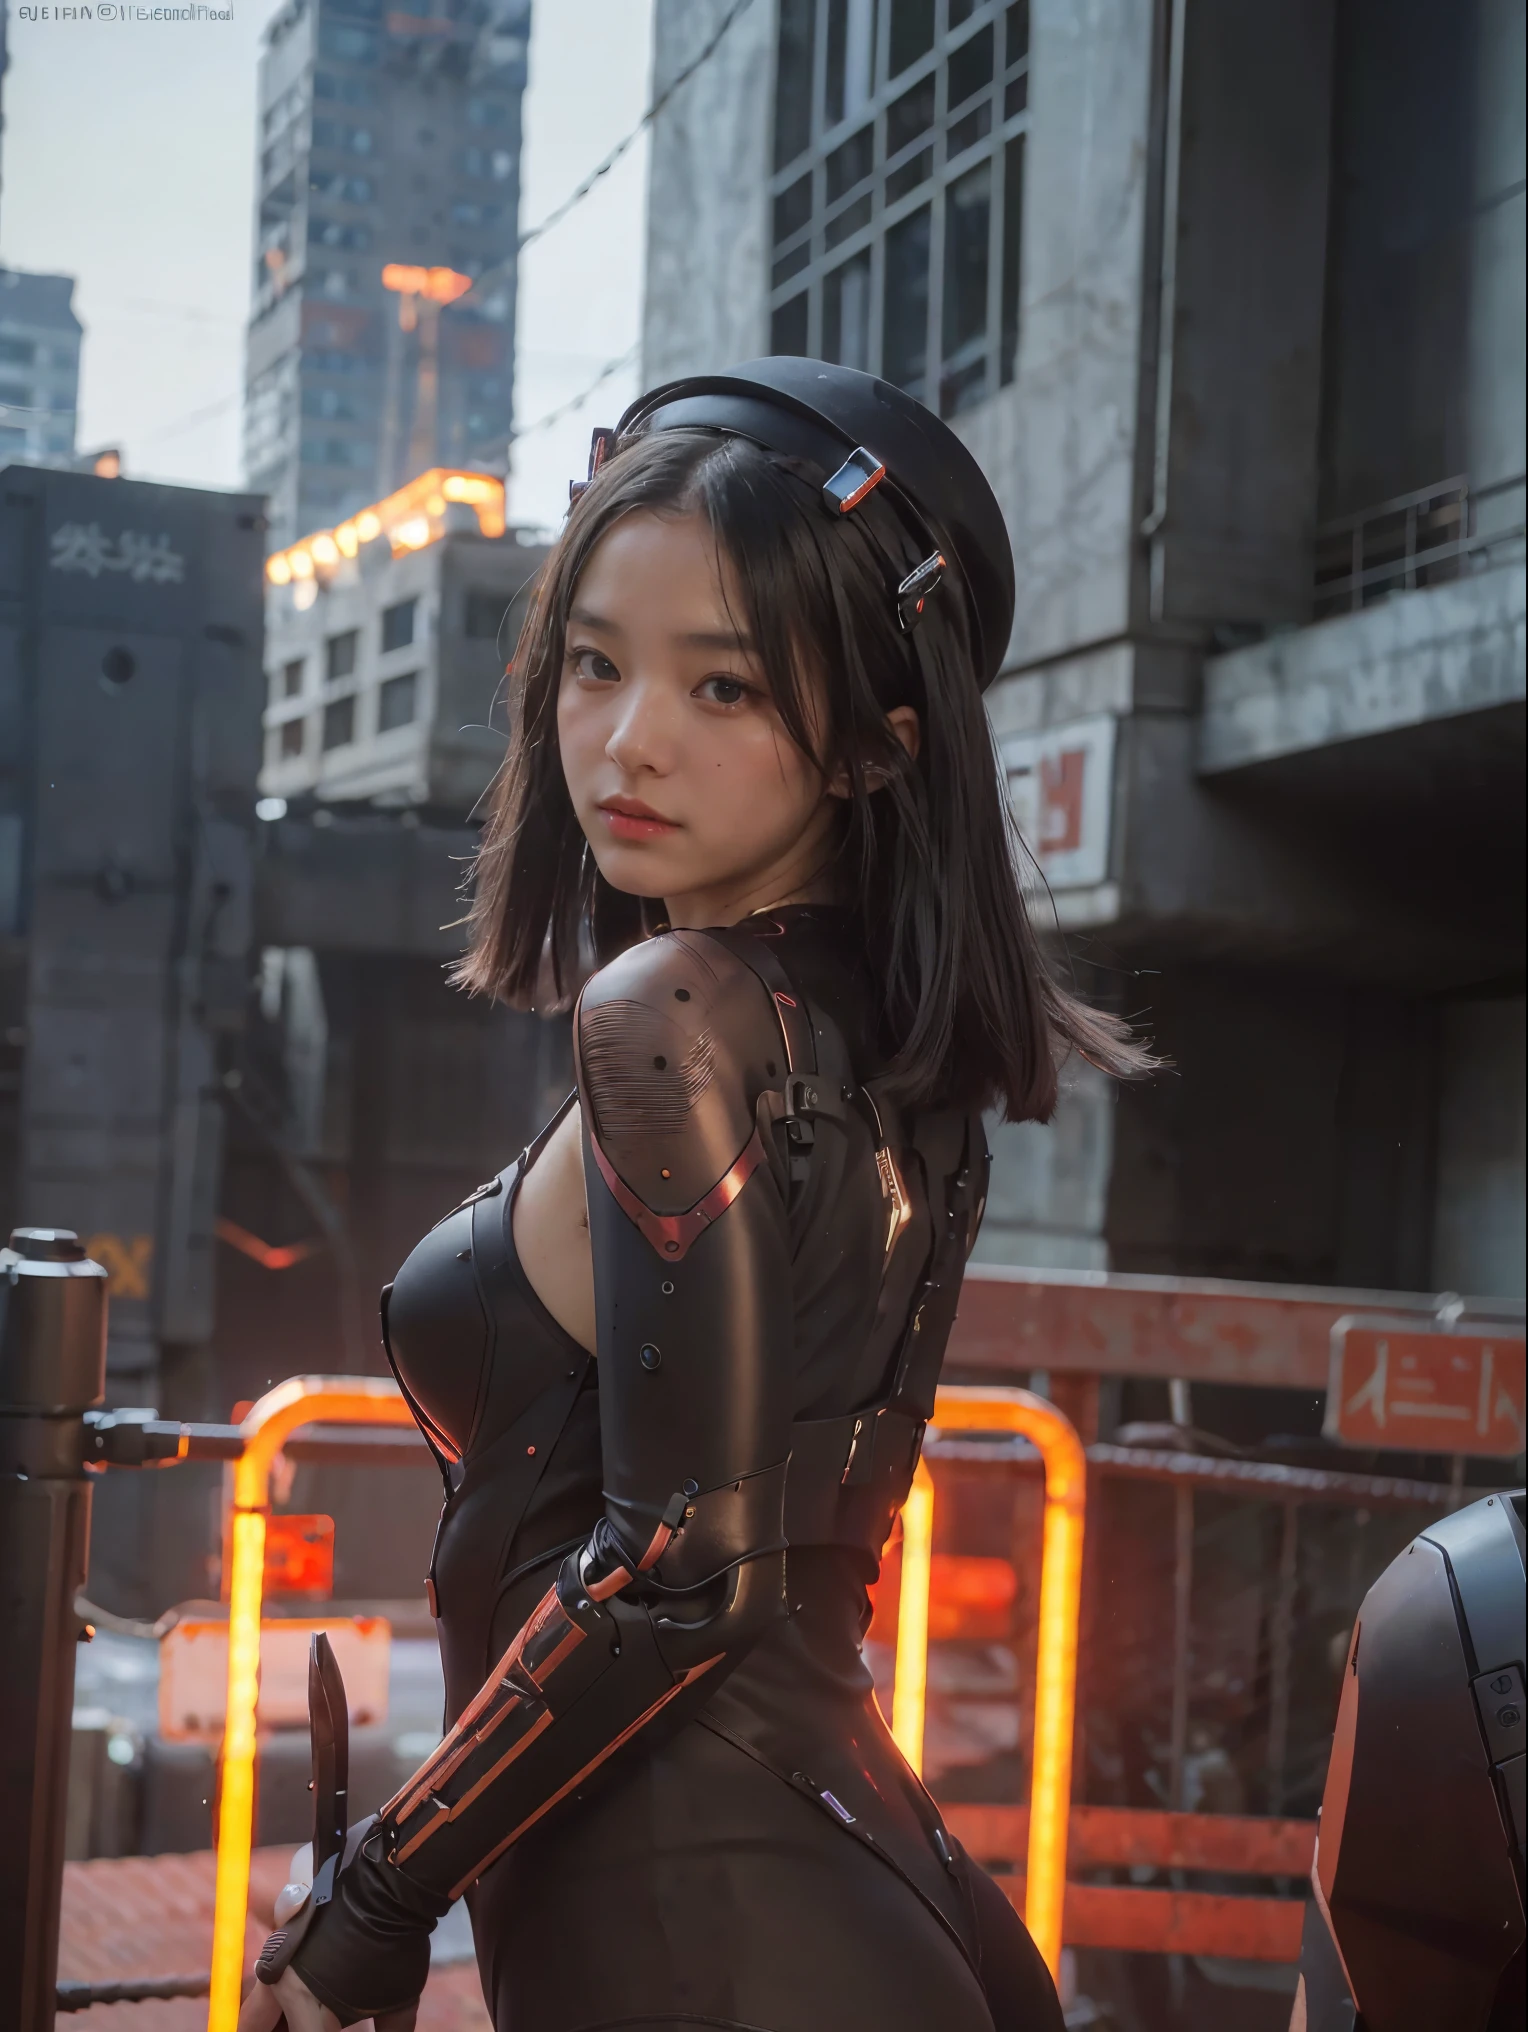 （Part of the skin is a computer）、top-quality、​masterpiece、超A high resolution、(With a futuristic machine gun、holding knive),（Wearing a futuristic hat）、(Photorealsitic:1.4)、Raw photo、1 girl、Black hair、glowy skin、((1 Mechanical Girl))、((super realistic details))、portlate、（Mystical expression）、（Has a huge rocket launcher）、explosions、Particles of light、（Small LED lamp）、Wire tubes that glow all over the body、(With state-of-the-art weapons),globalillumination、Shadow、octan render、8K、Armpit、ultrasharp、Colossal 、Small LED lamp、Raw skin is exposed in cleavage、metals、blood vessels connected to tubes、With weapons、Red bodysuit、Armpit、Cyberpunk city background、Details of complex ornaments、Japan details、highly intricate detail、Realistic light、CGSoation Trends、Blue eyes、radiant eyes、Facing the camera、neon details、（Tattoo numbers on the face）、Mechanical limbs、blood vessels connected to tubeechanical vertebrae attached to the back、mechanical cervical attaching to neck、Wires and cables connecting to the head、Gundam、Small LED lamp、Toostock、Toostock、Futuristic machine gun、Knives、(Red Metallic Bodysuit),